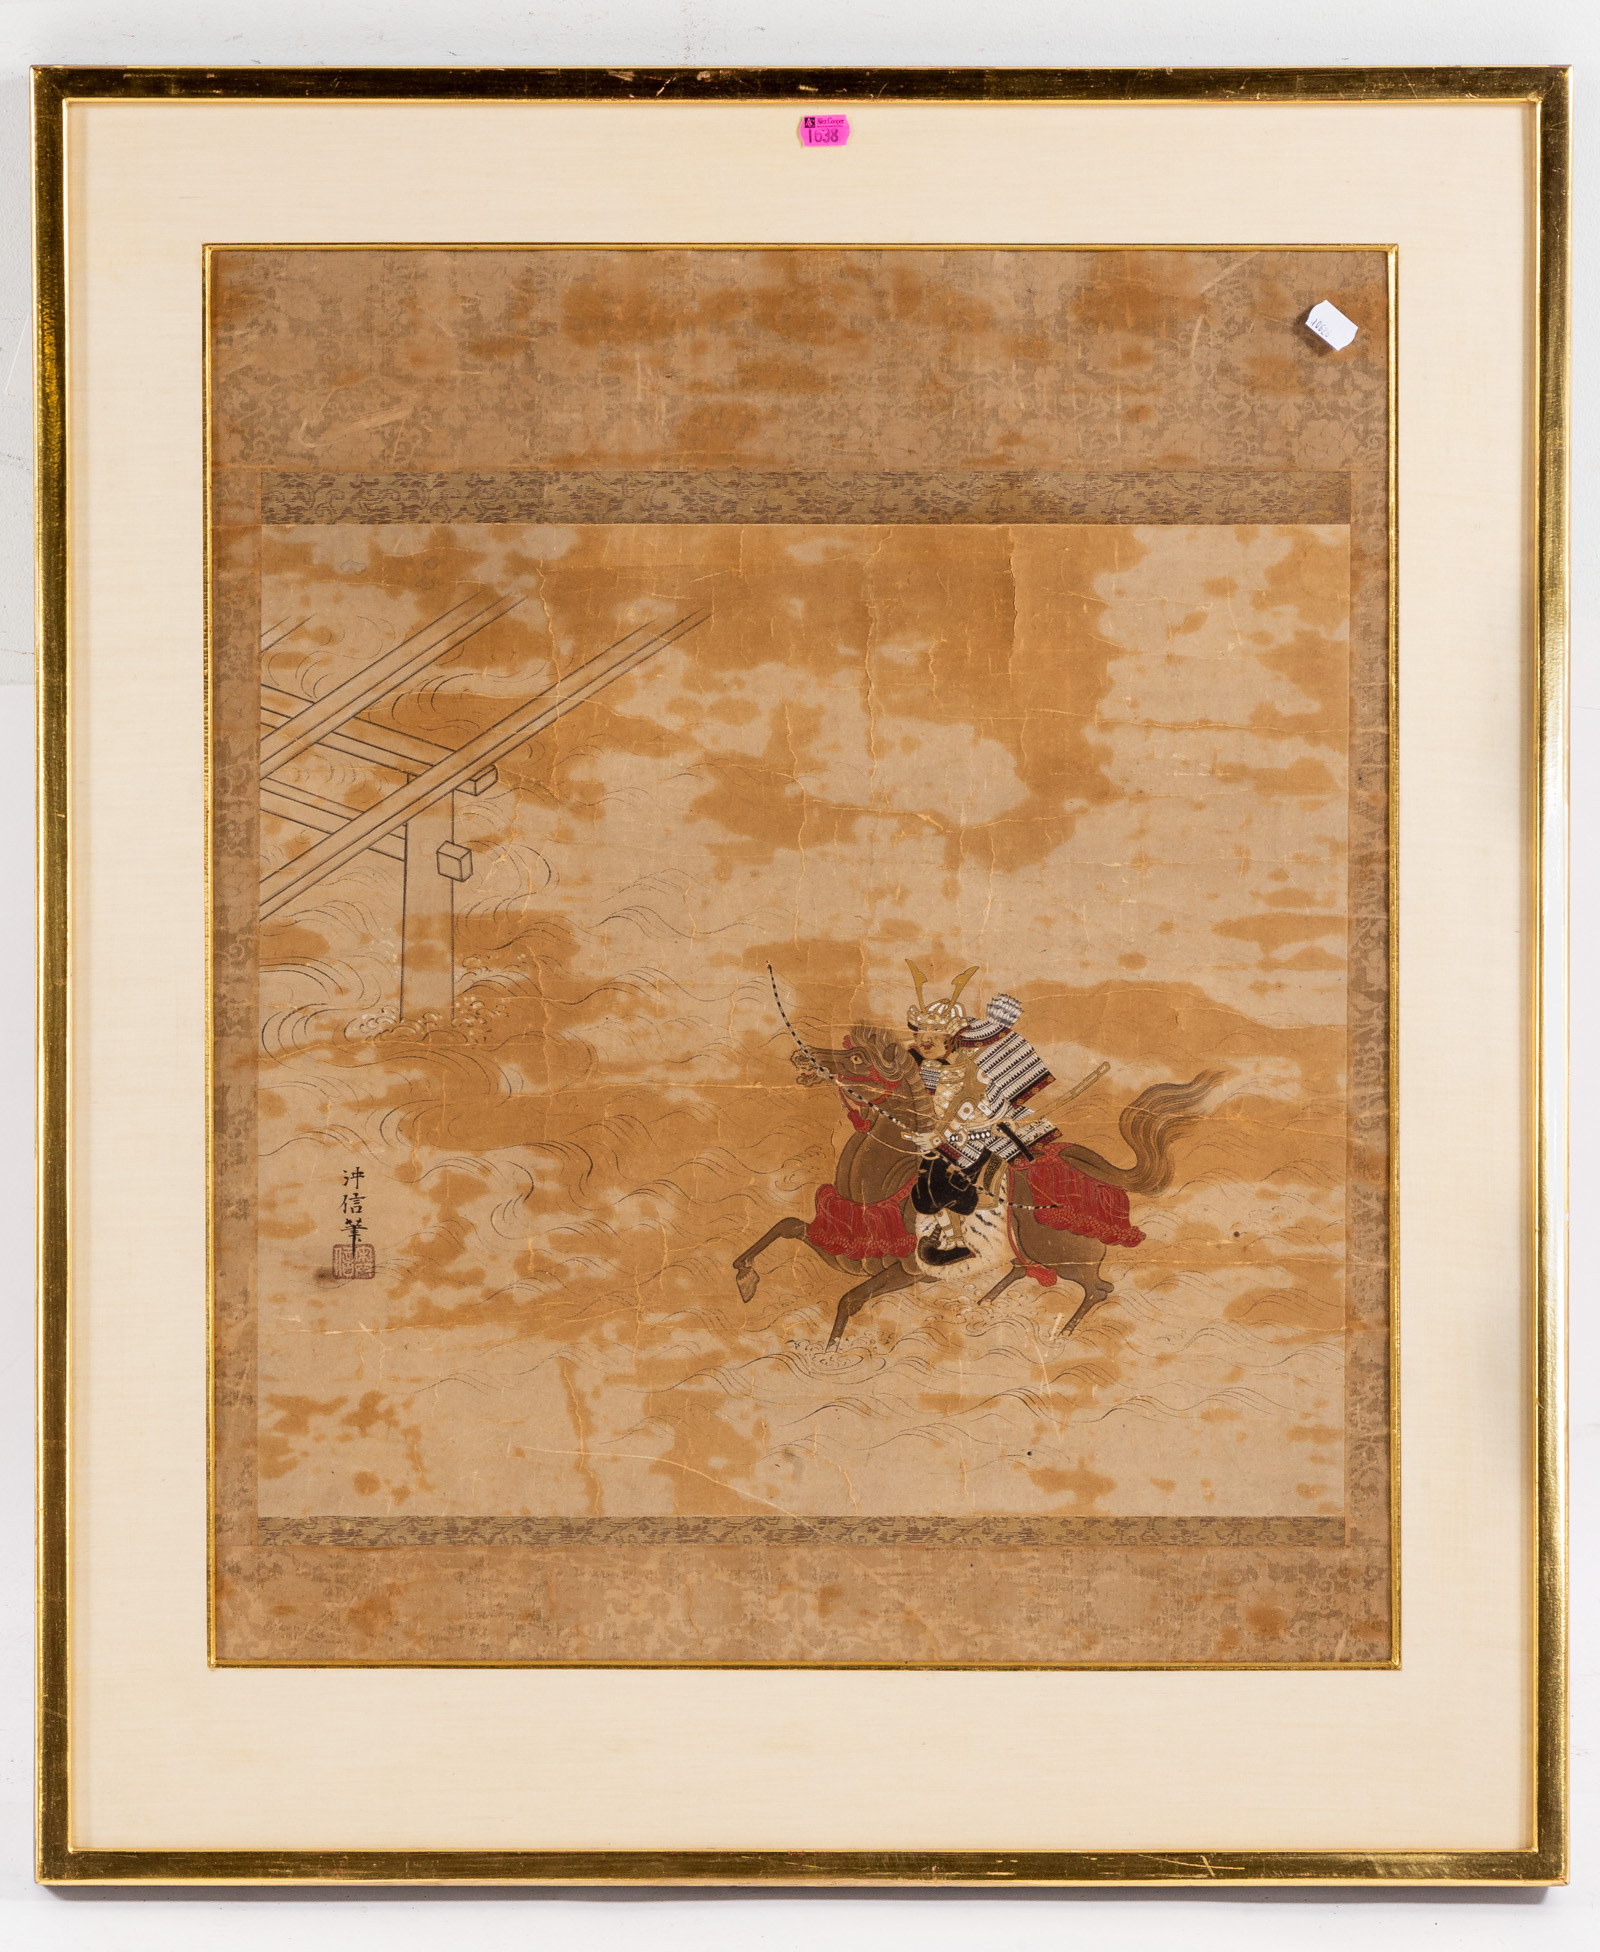 JAPANESE PAINTED SCROLL OF A CHARGING